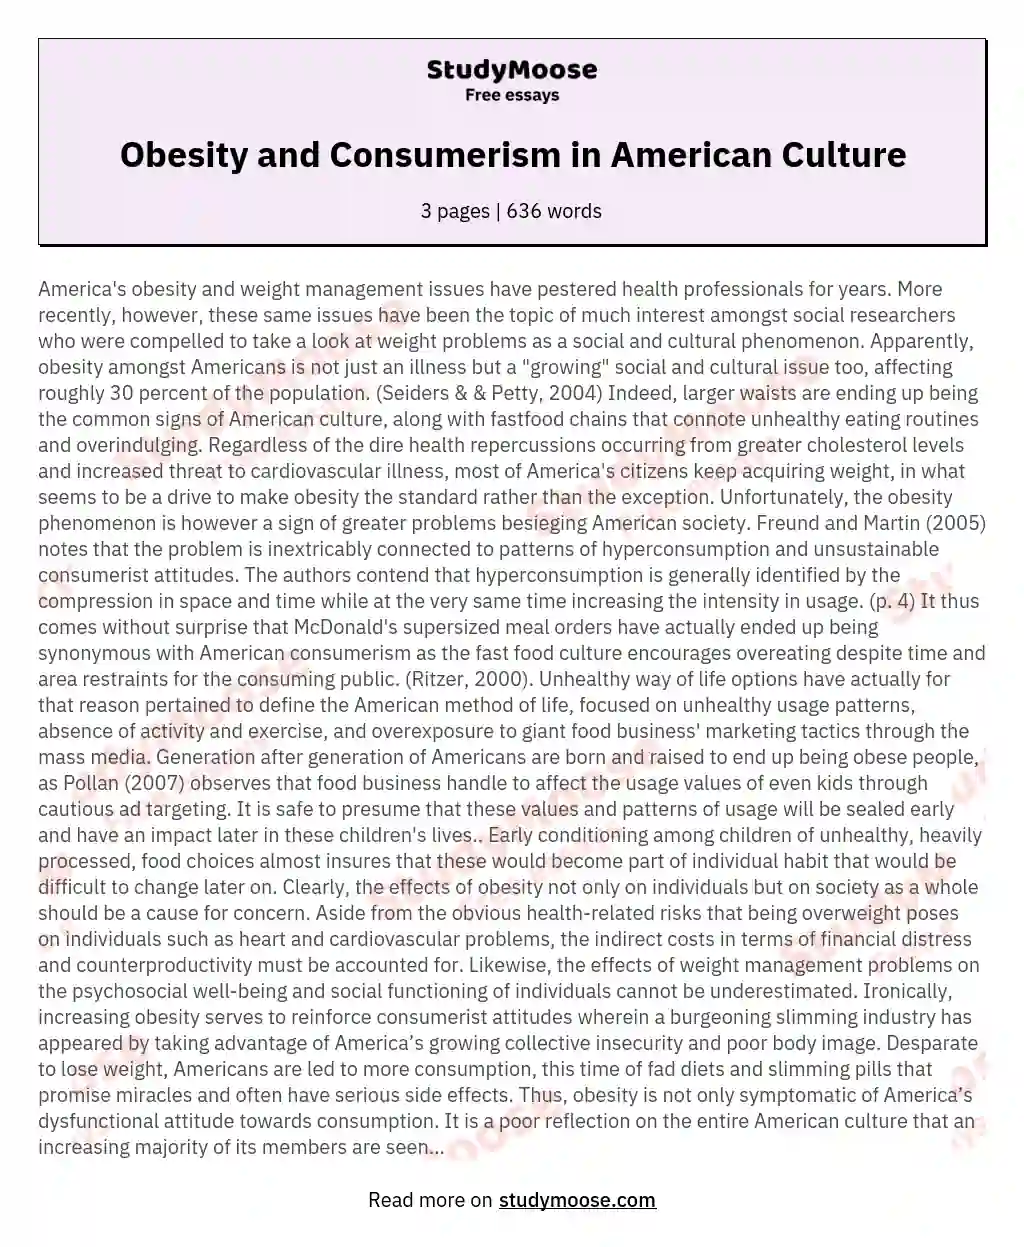 Obesity and Consumerism in American Culture essay